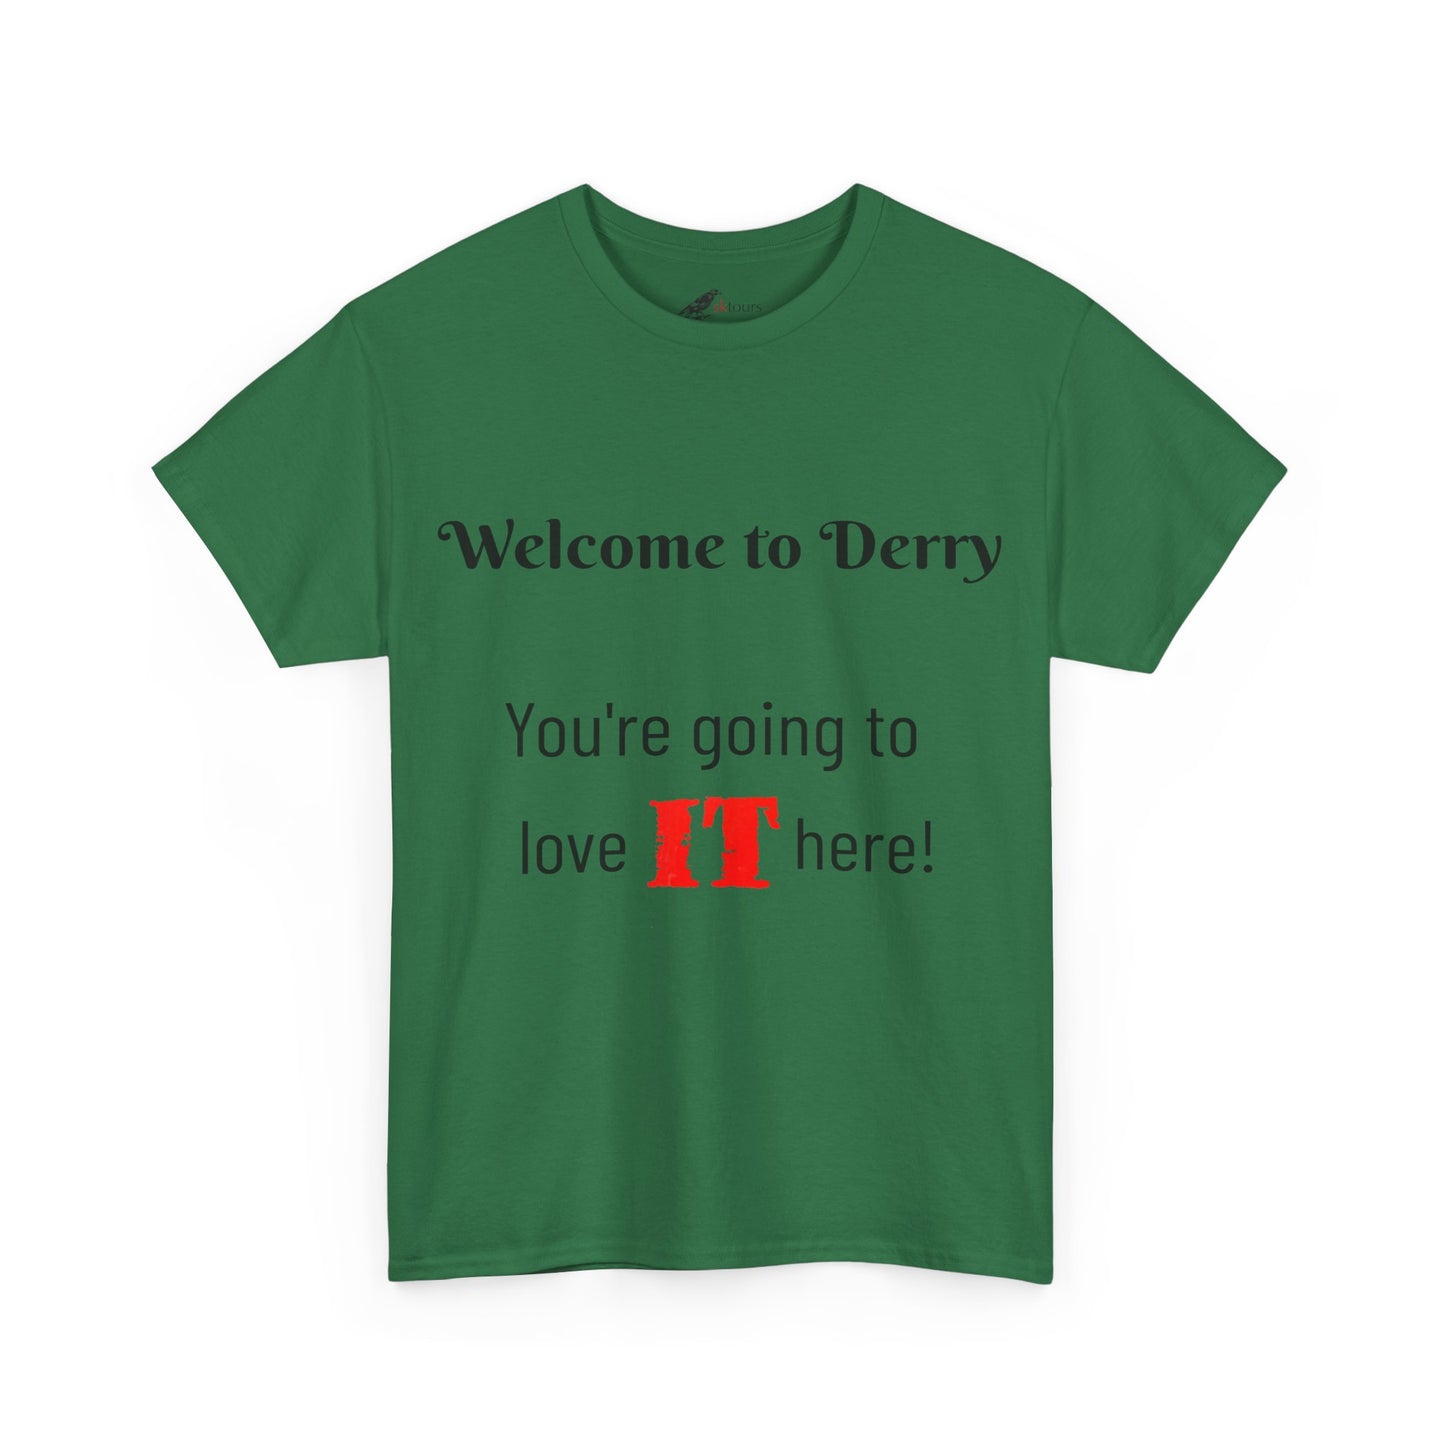 Welcome to Derry Tee